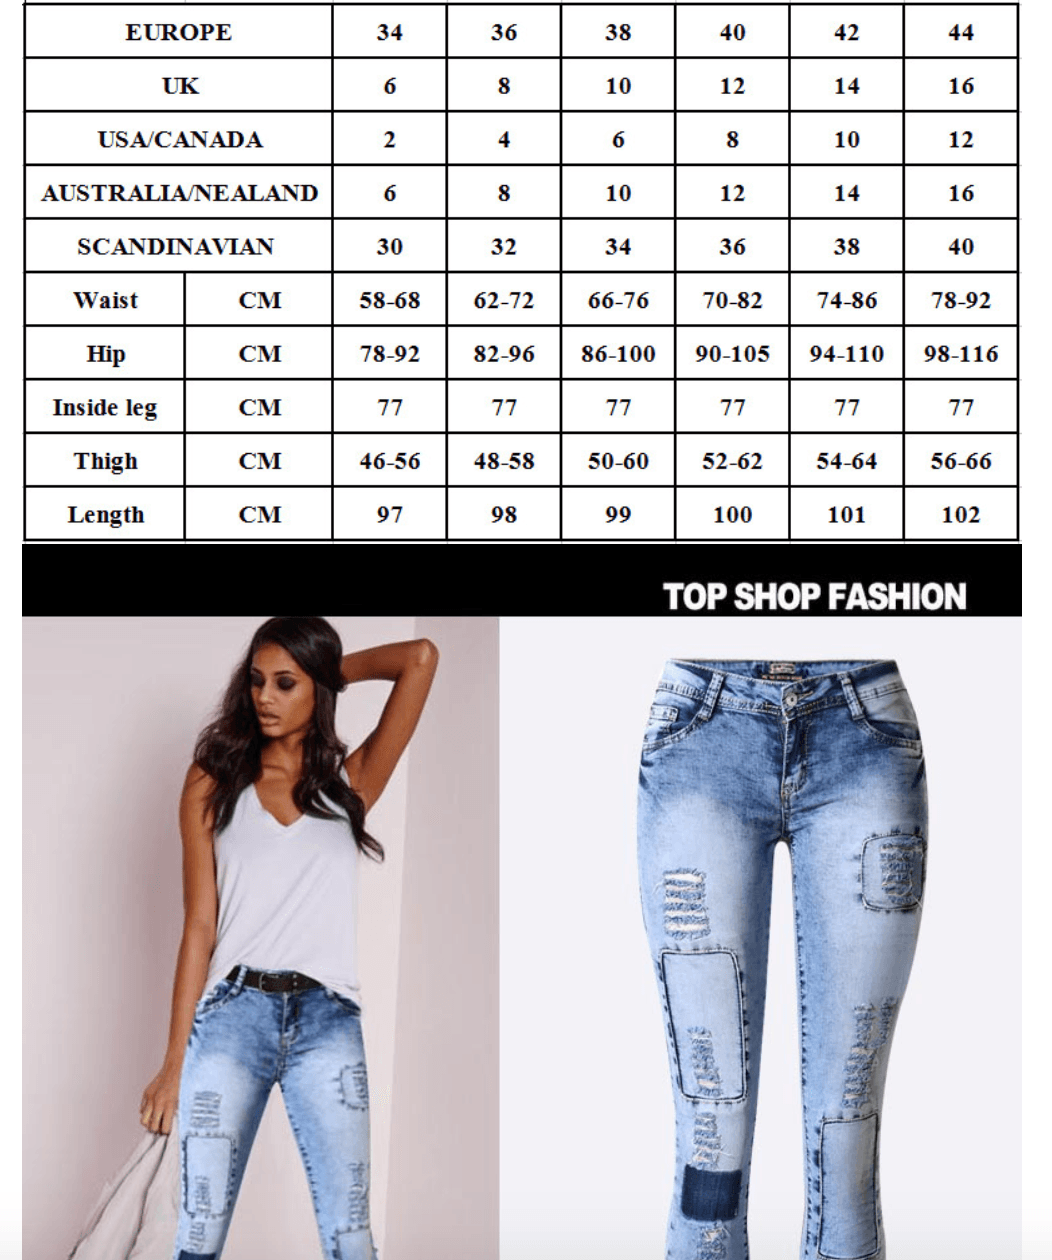 Great Ripped Jeans - Women Holes Skinny Jeans - Elastic Jeans (TB6)(BCD3)